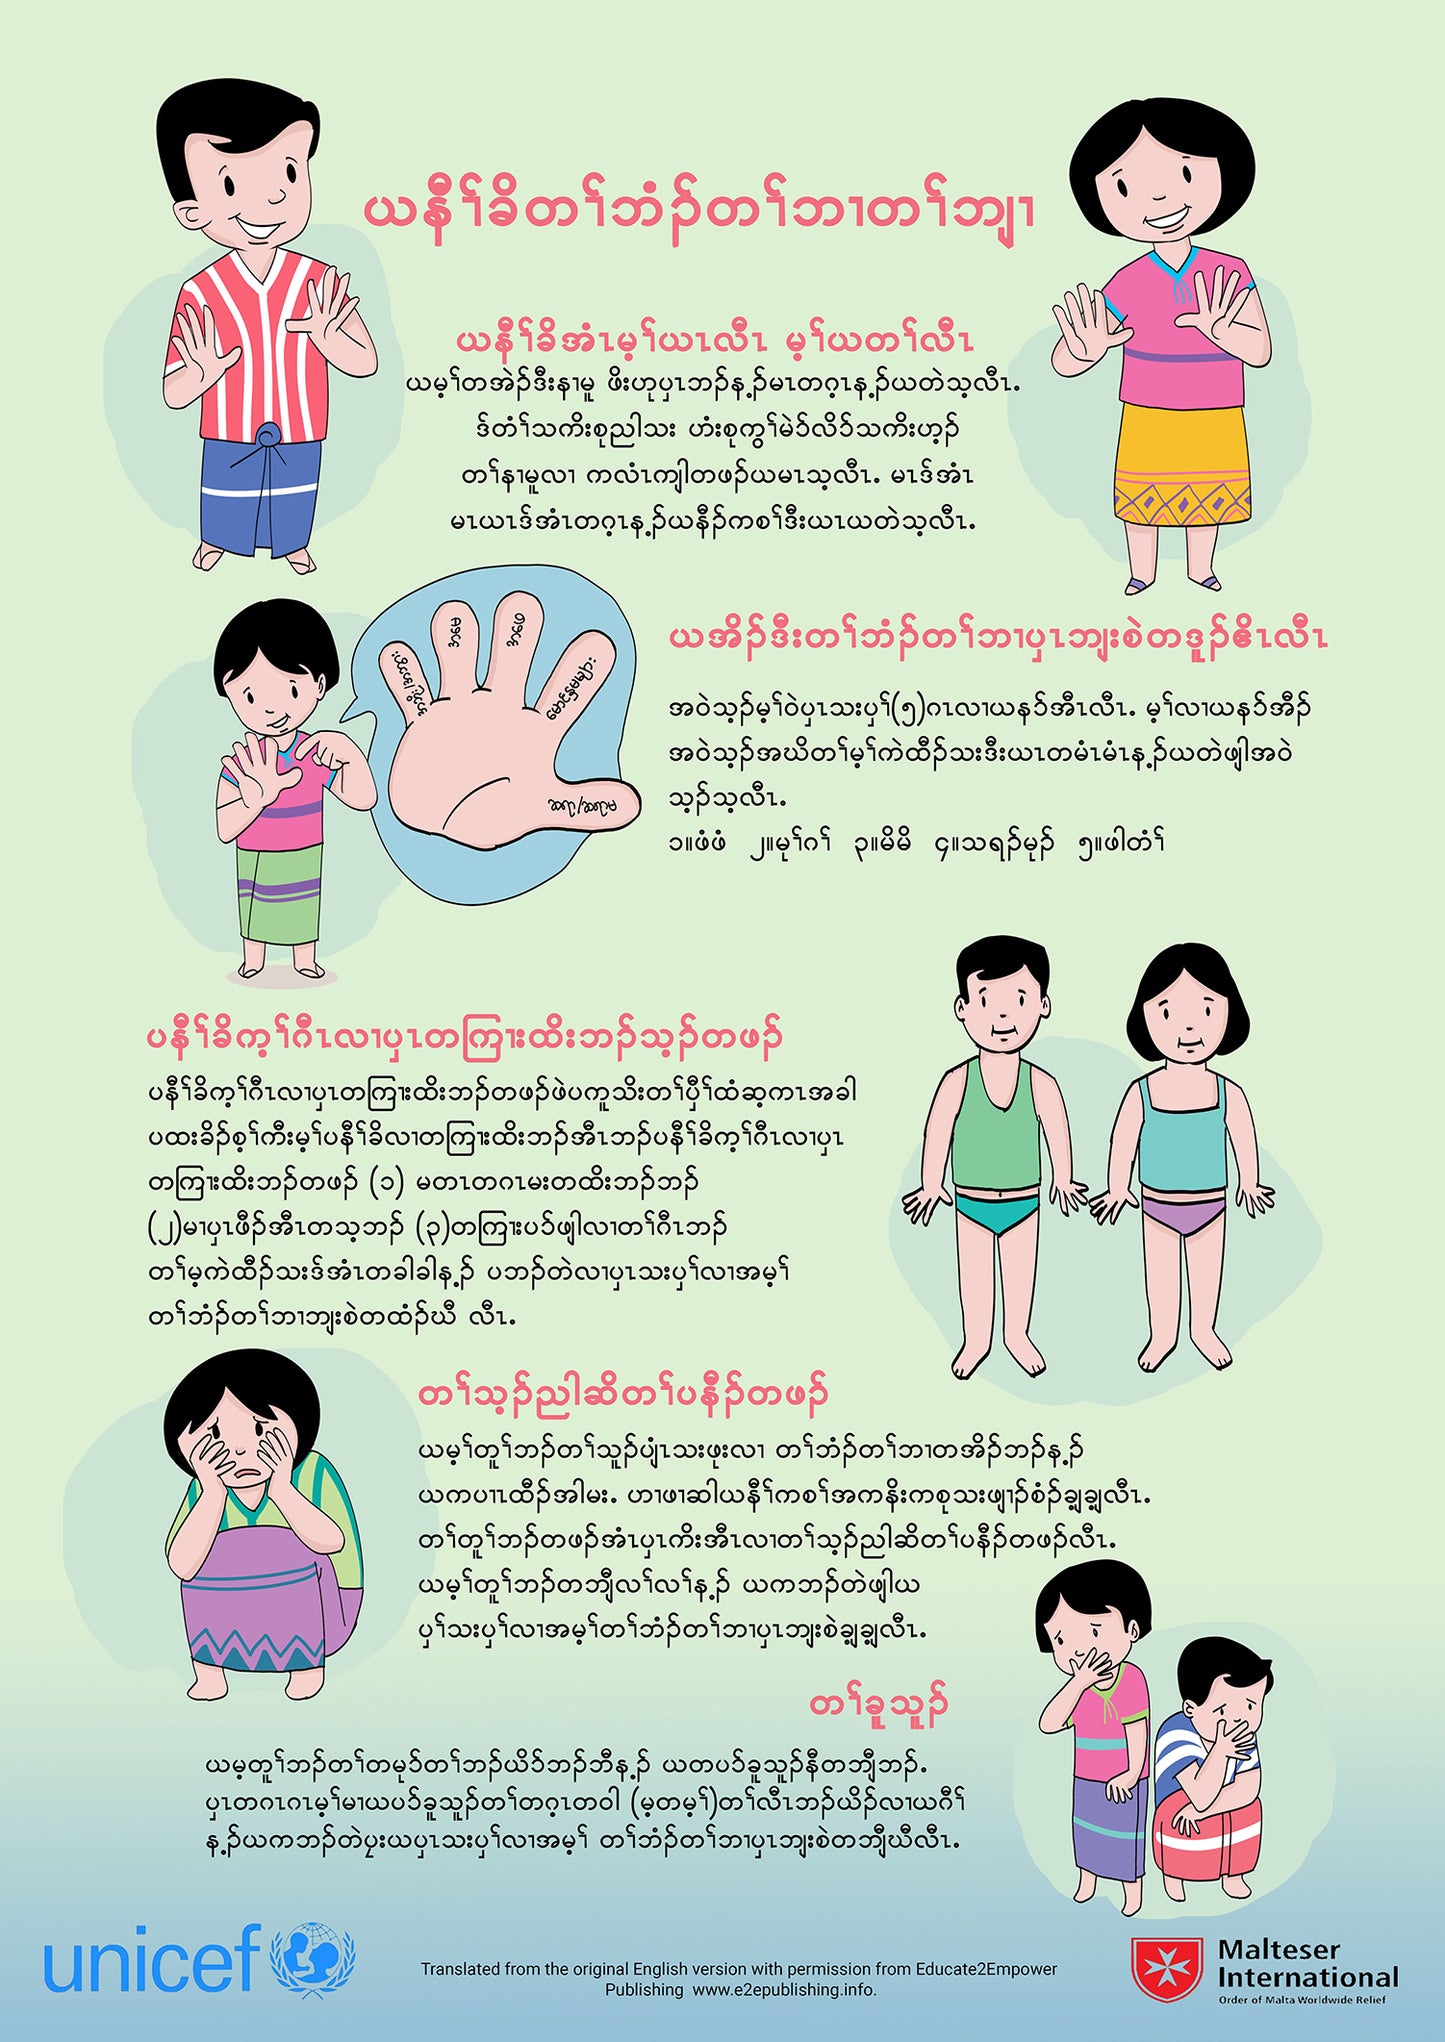 Body Safety Rules poster for children, written in the Saga Kayin Language